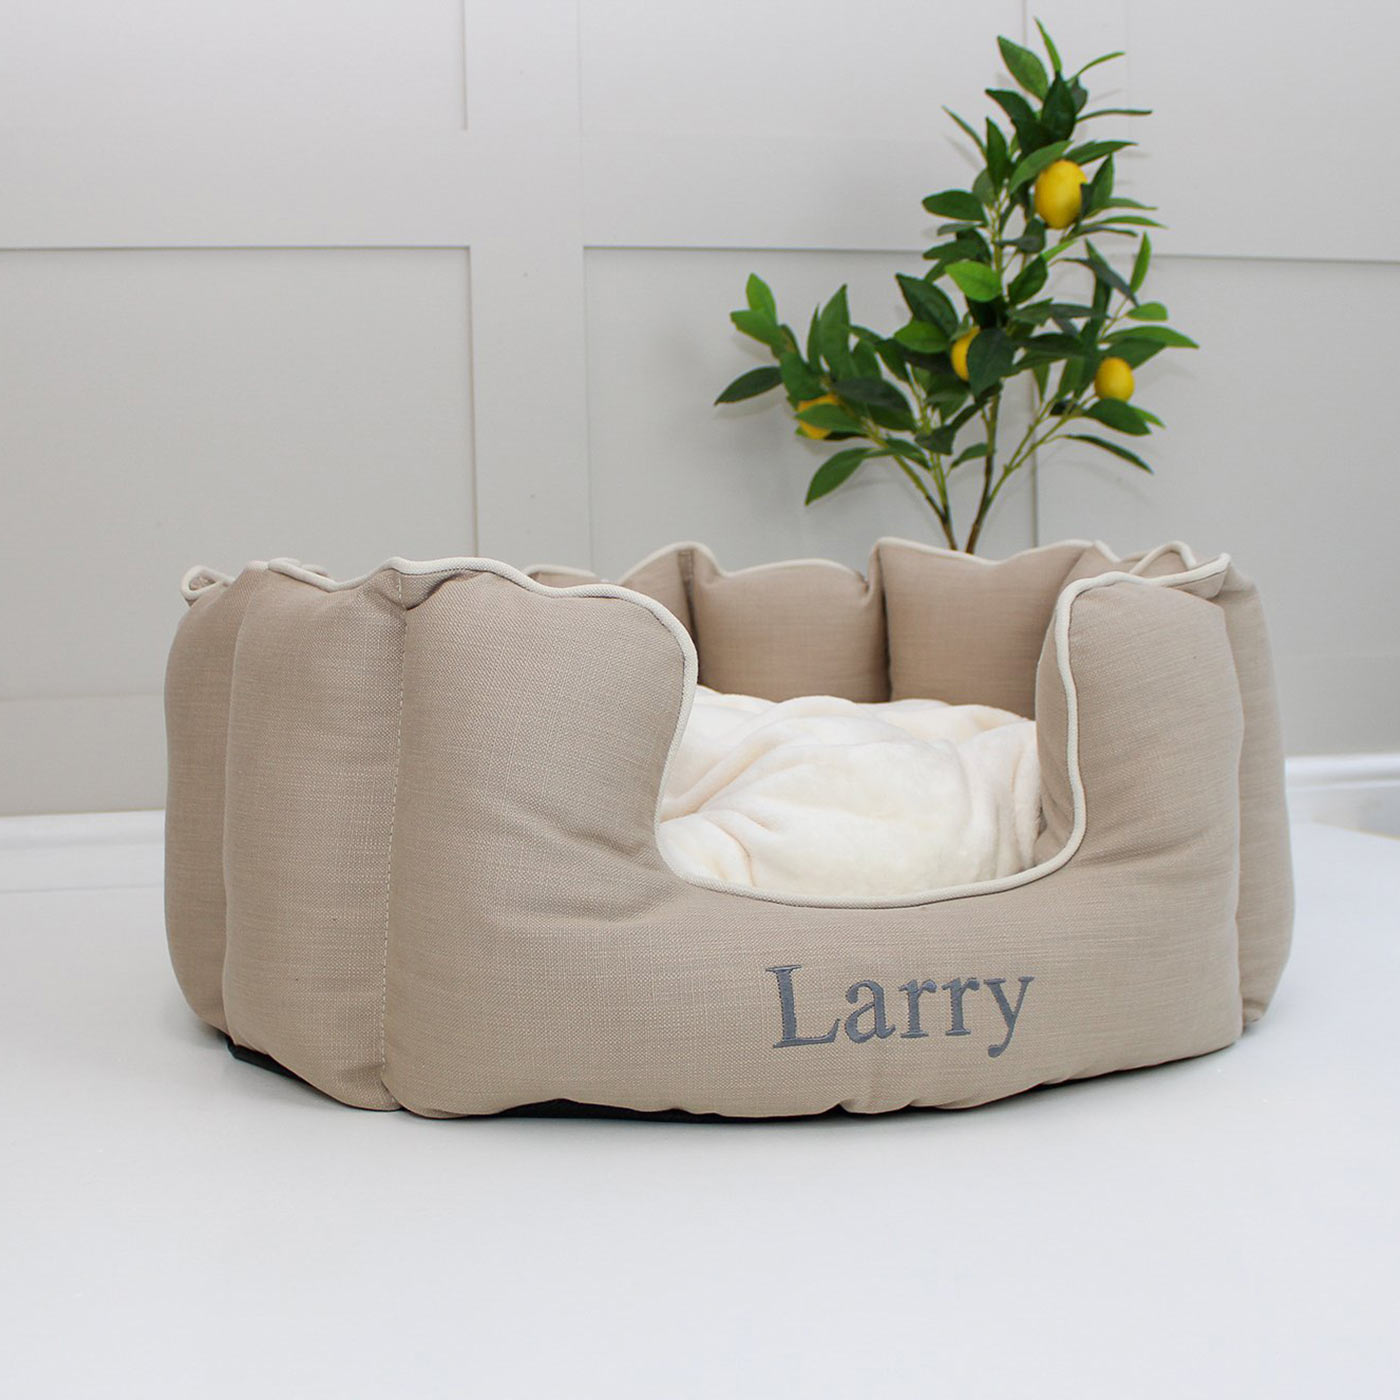 [color:savanna oatmeal] Discover Our Luxurious High Wall Bed For Cats, Featuring inner pillow with plush teddy fleece on one side To Craft The Perfect Cats Bed In Stunning Savanna Oatmeal! Available To Personalize Now at Lords & Labradors US